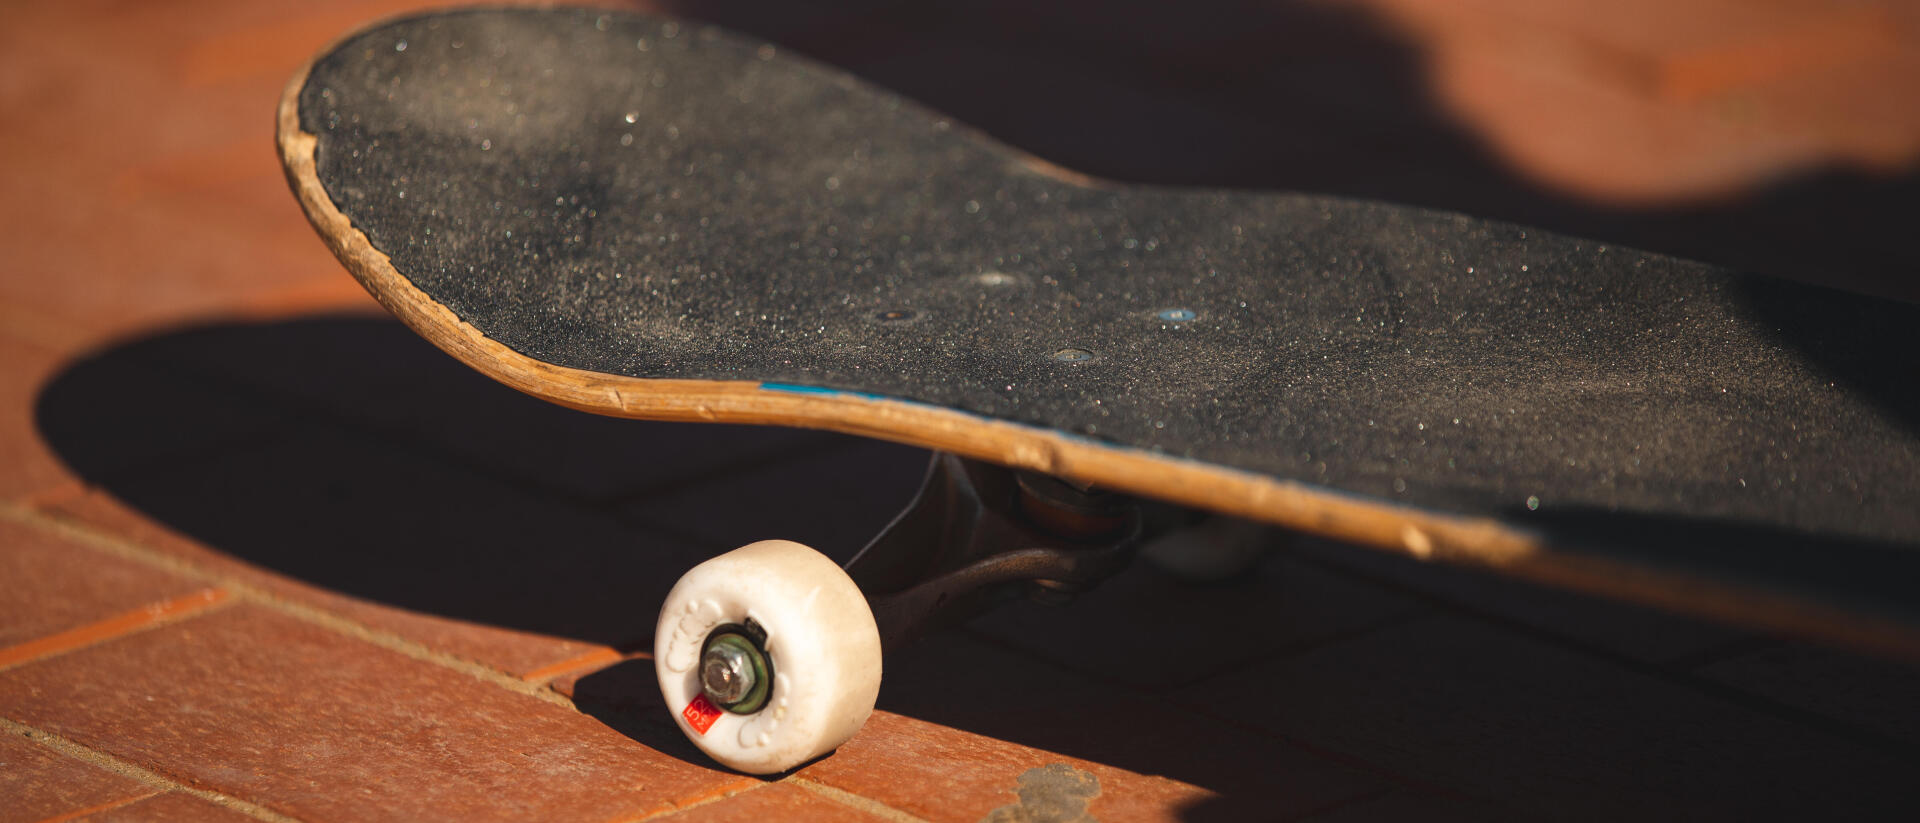 How do you clean and replace a skateboard grip?